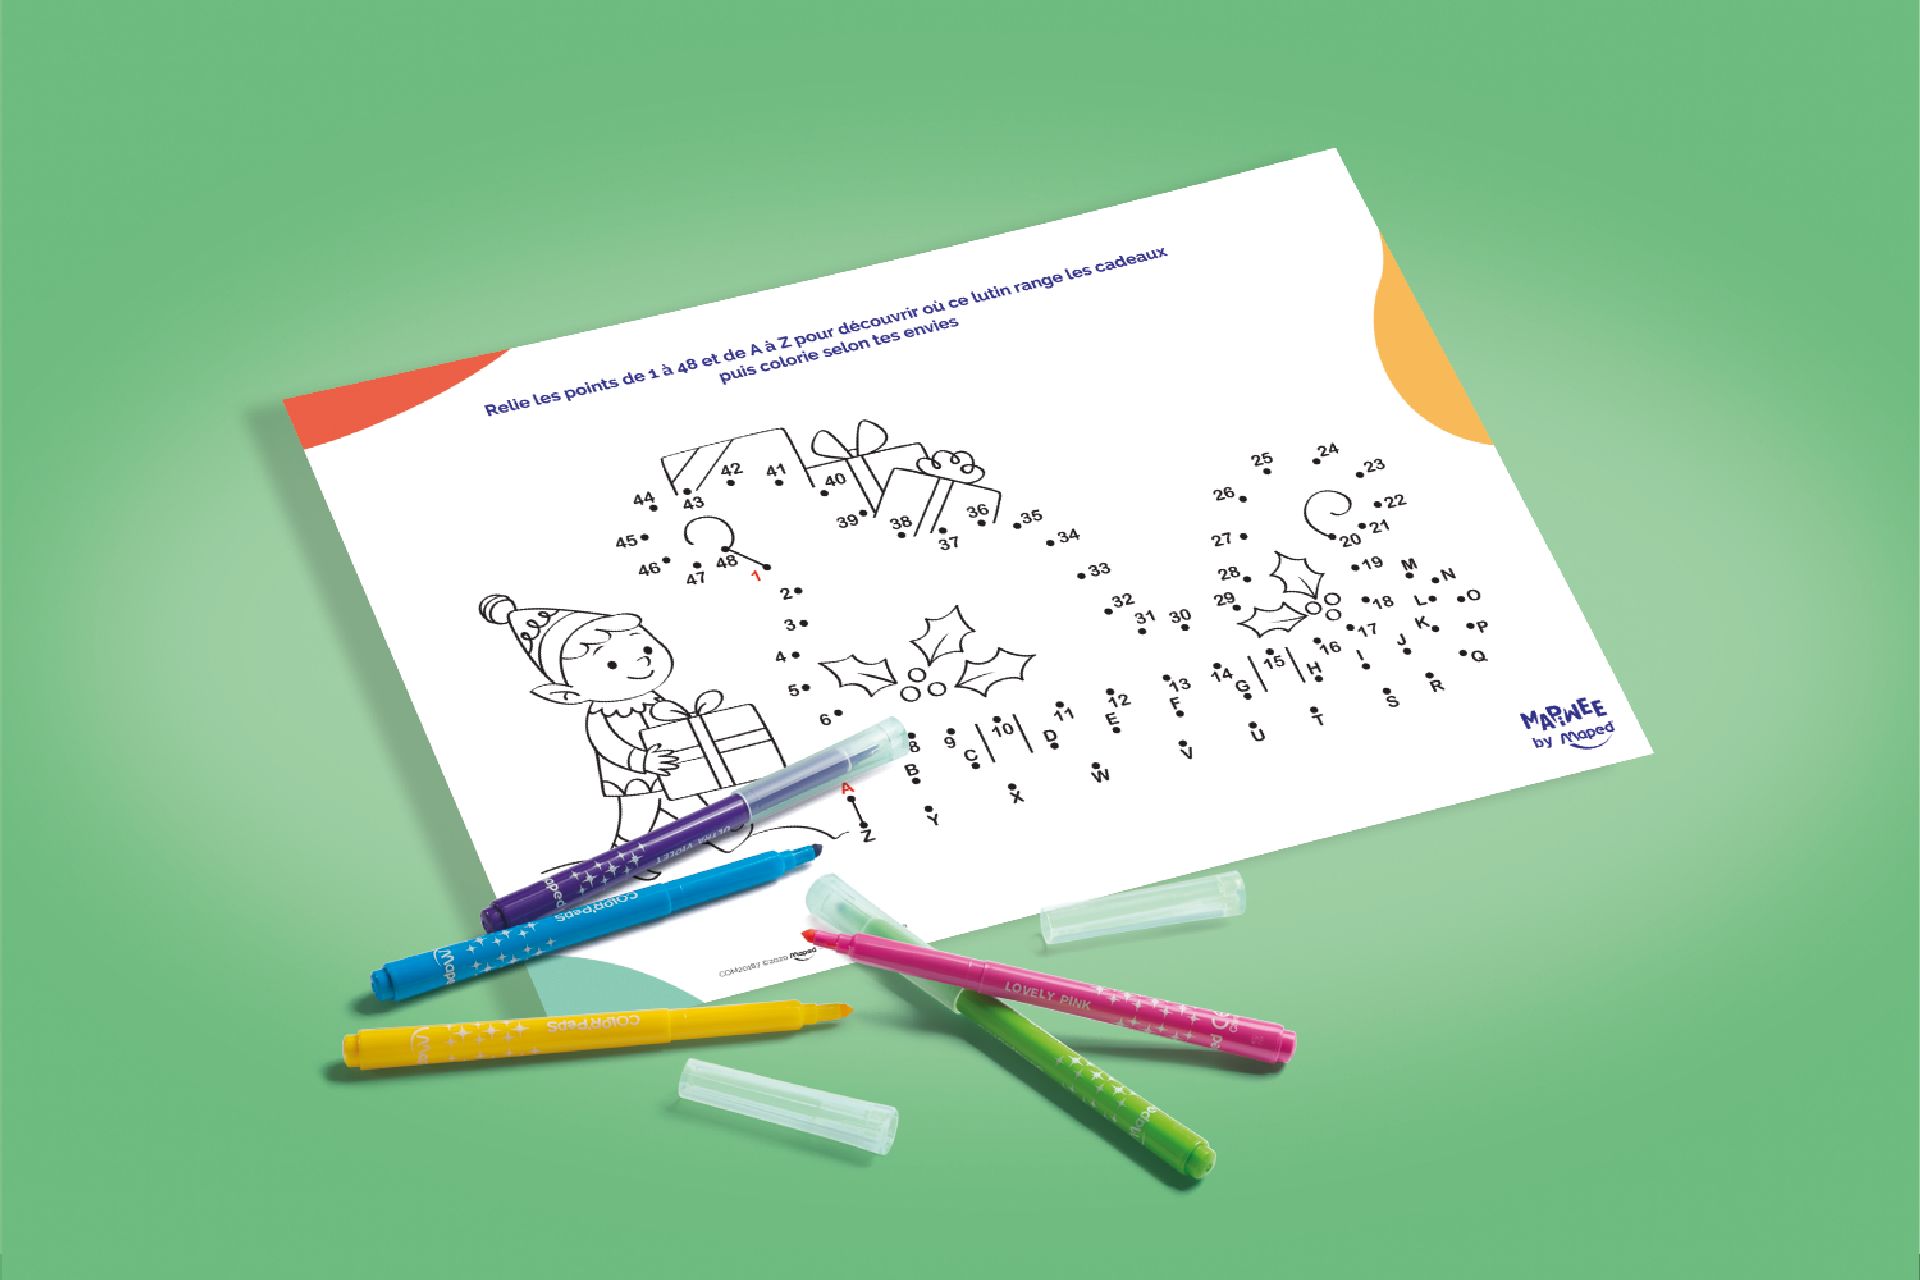 A dot to dot activity sheet laying on a green background with coloured felt pens